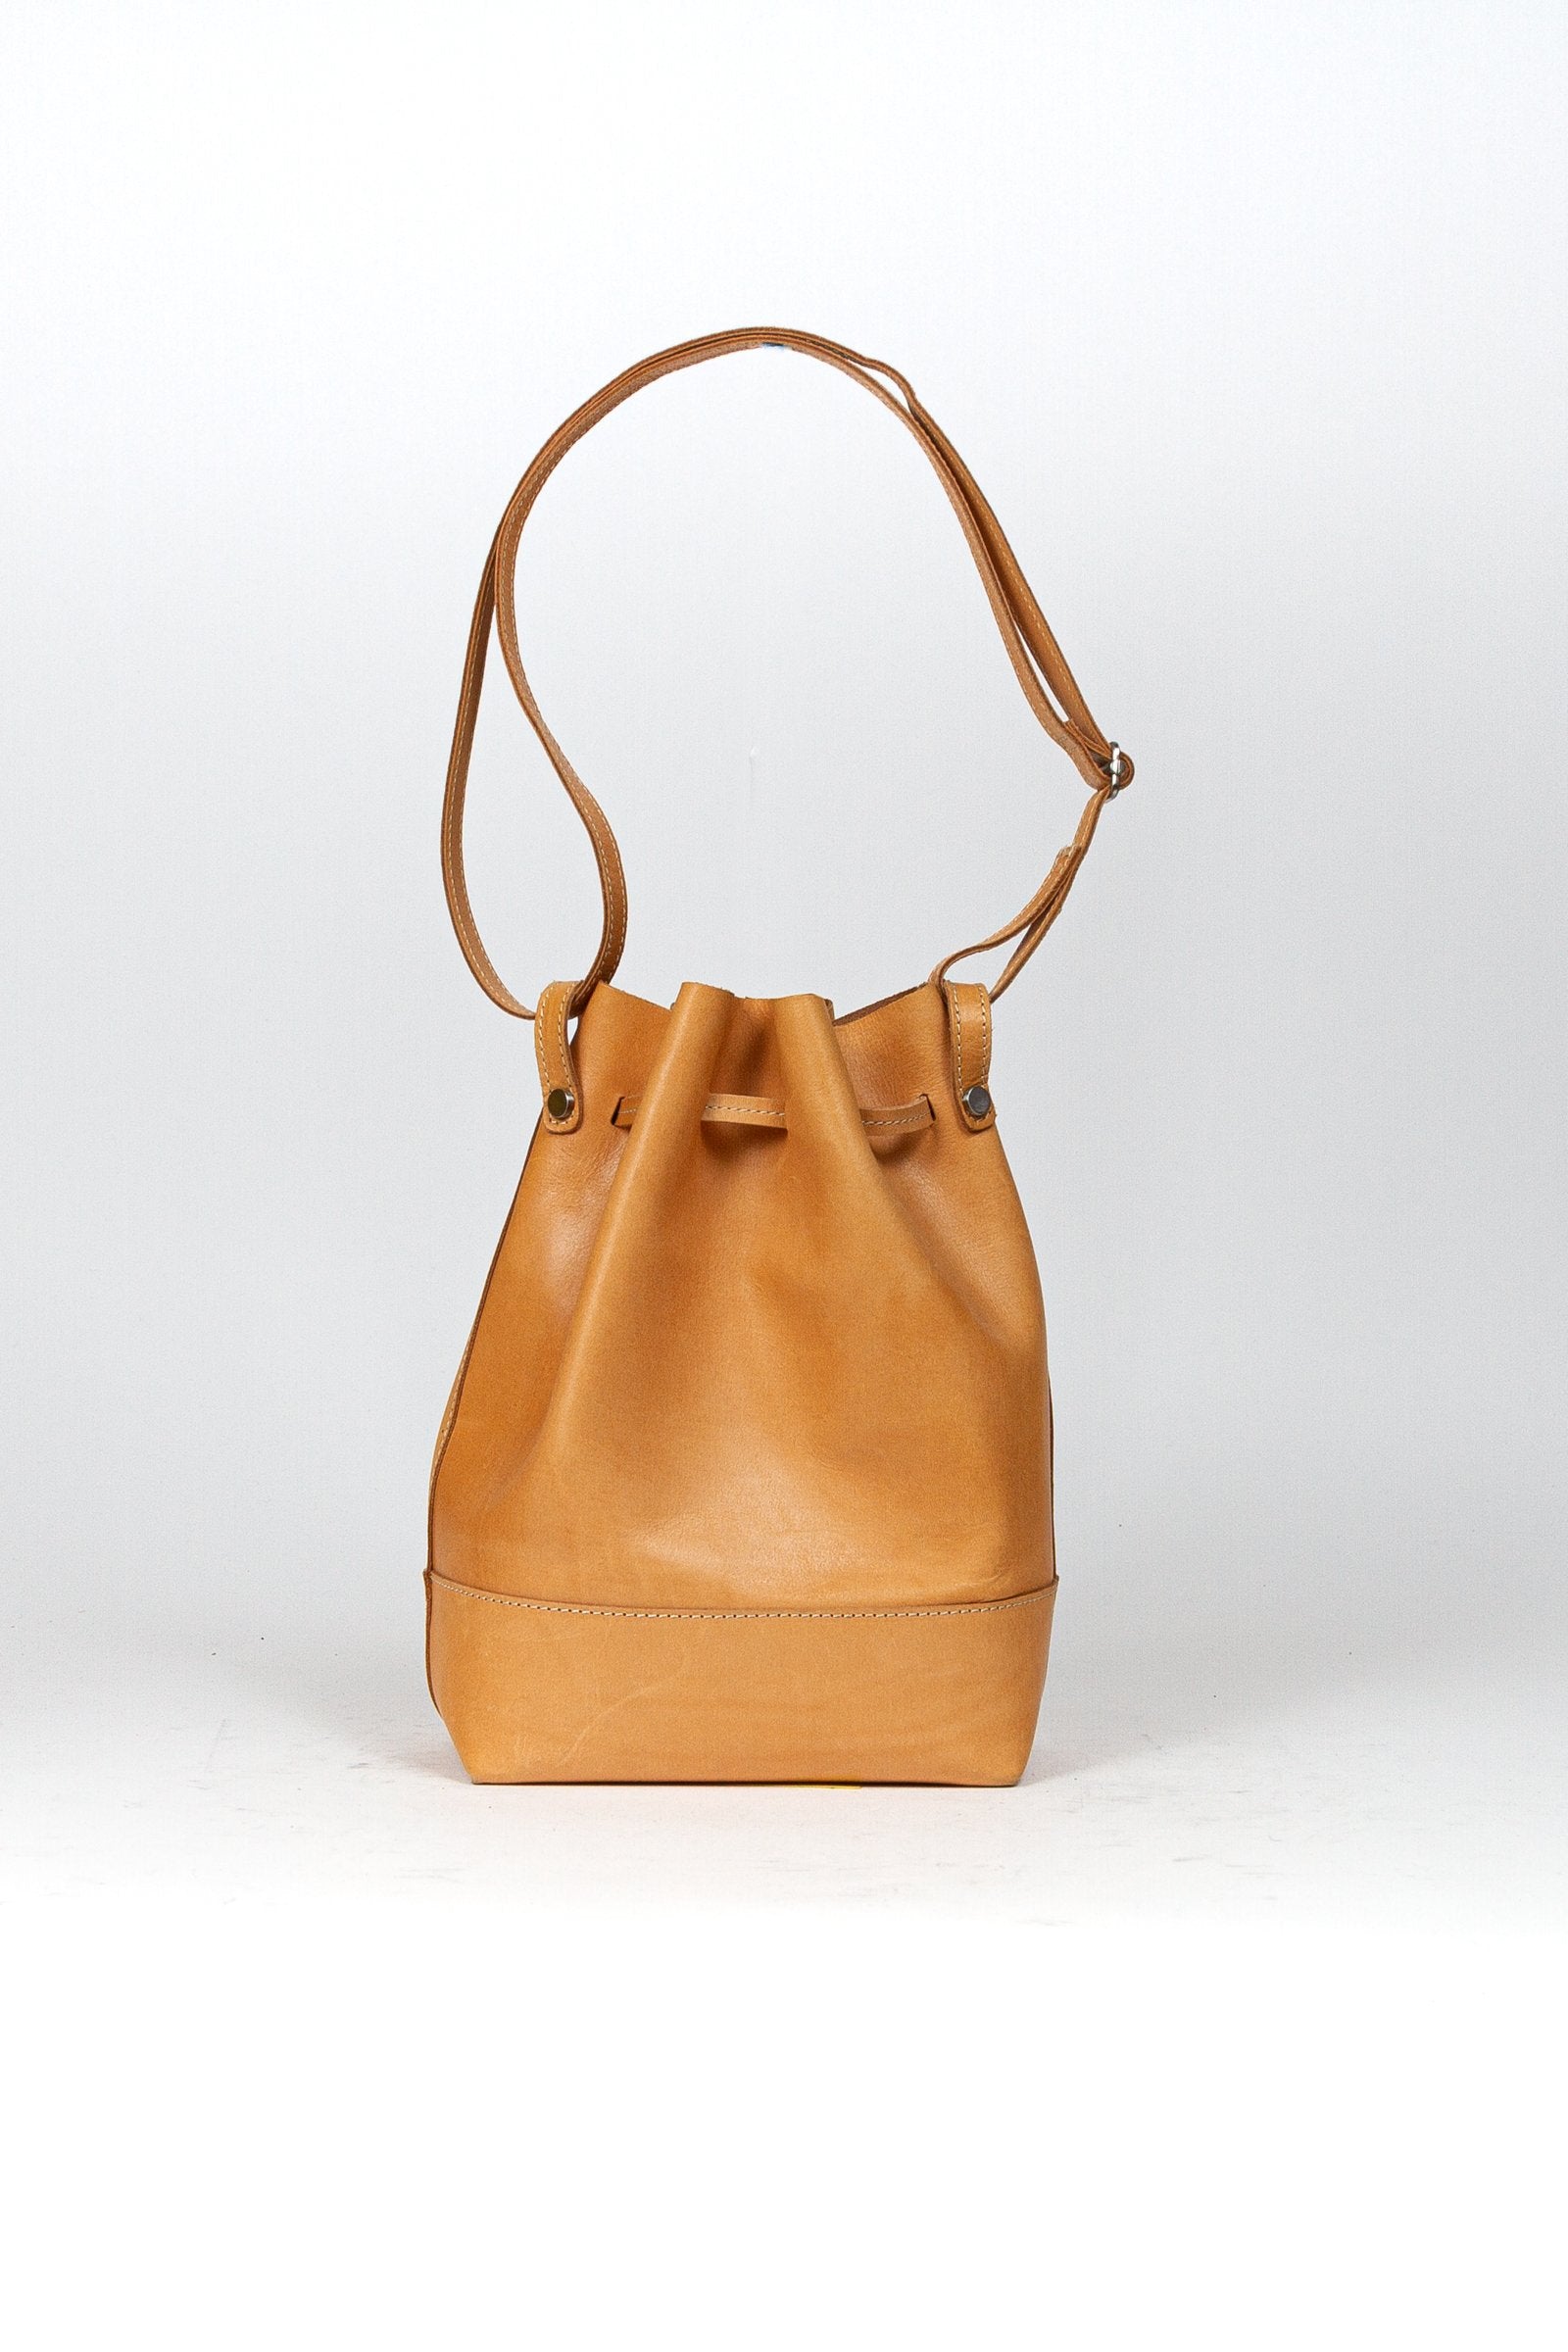 BEON.COM.AU The Jost Vantaa Bucket Bag is a leather bag made in Europe from premium European leathers and fabrics. Vegetable tanned leather (so will age and patina naturally!) Key holder and a removable zipper case Main compartment closes with drawstring Adjustable shoulder strap 66-119 cm  33cm x 22cm x 12c... Jost at BEON.COM.AU